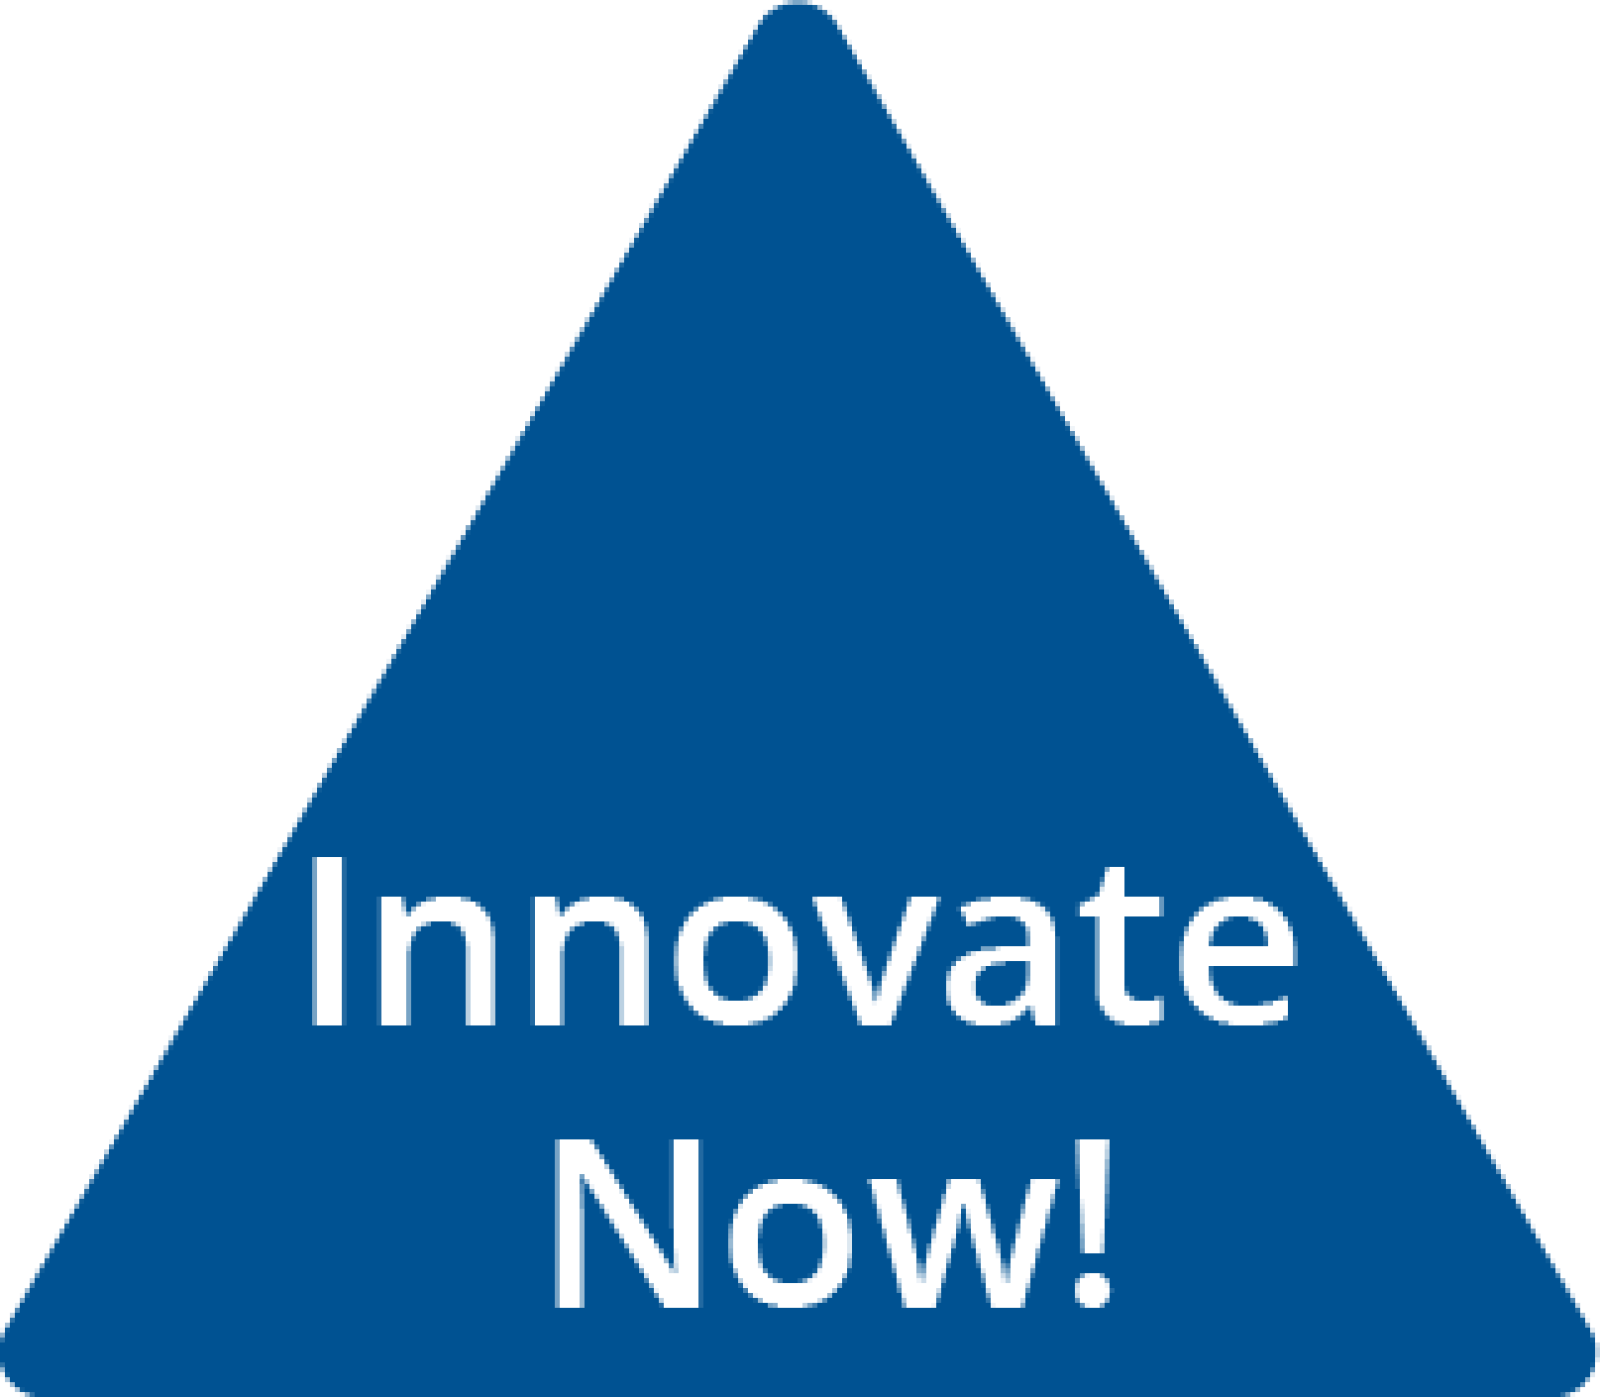 Innovate Now! image